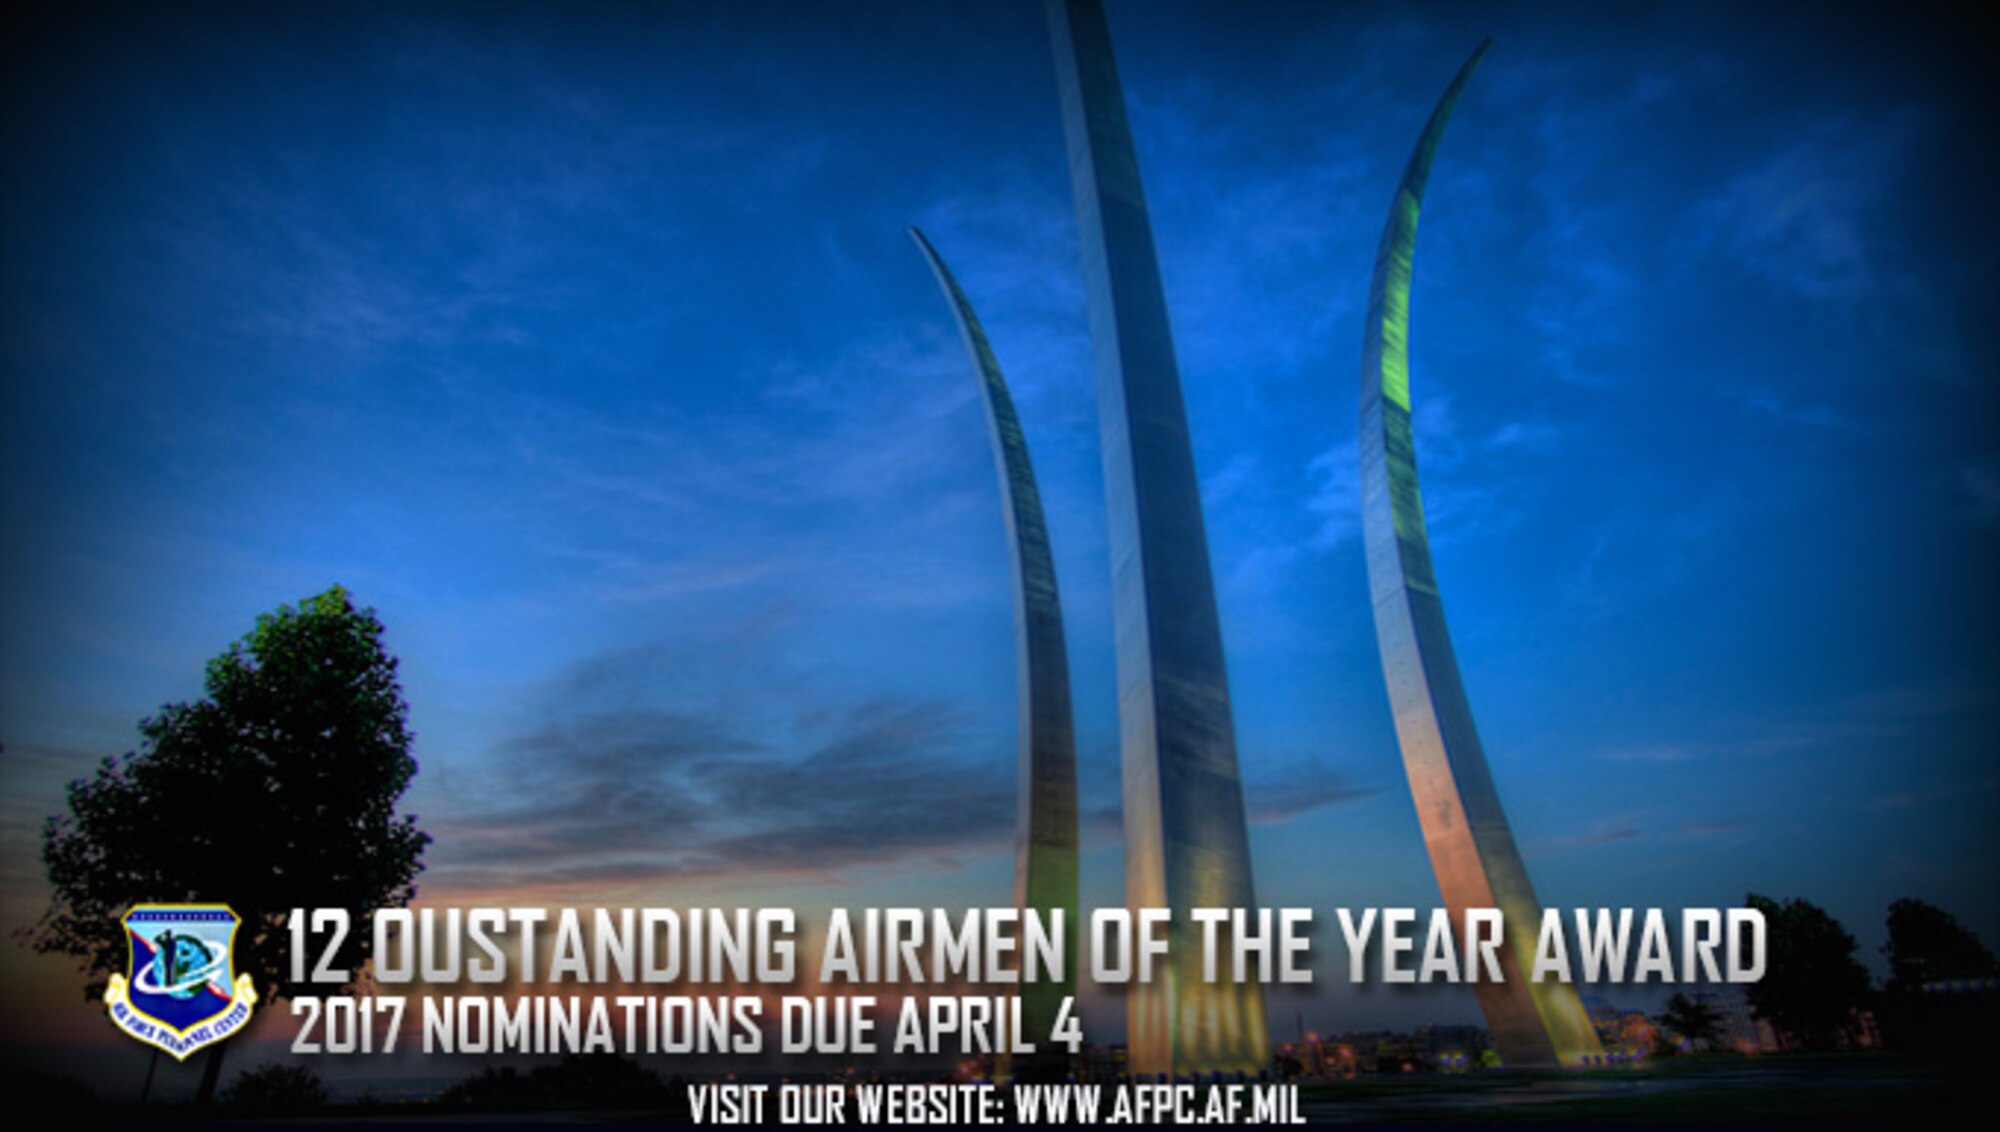 Air Force officials are seeking 2017 nominations for the 12 Outstanding Airmen of the Year Award. Nominations are due to the Air Force Personnel Center by April 4. (U.S. Air Force courtesy photo) 